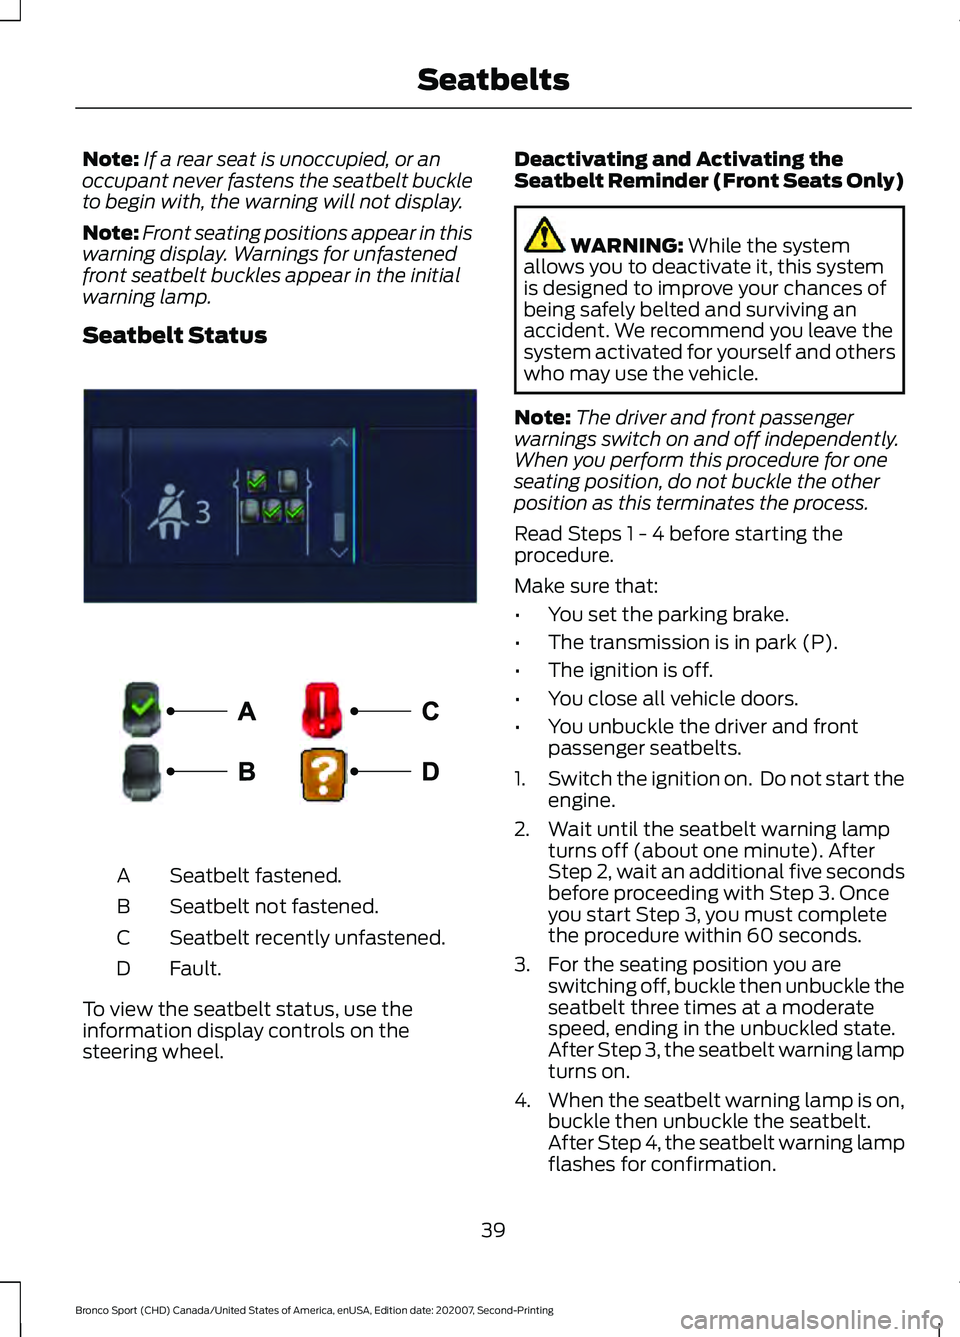 FORD BRONCO SPORT 2021 Service Manual Note:
If a rear seat is unoccupied, or an
occupant never fastens the seatbelt buckle
to begin with, the warning will not display.
Note: Front seating positions appear in this
warning display. Warnings